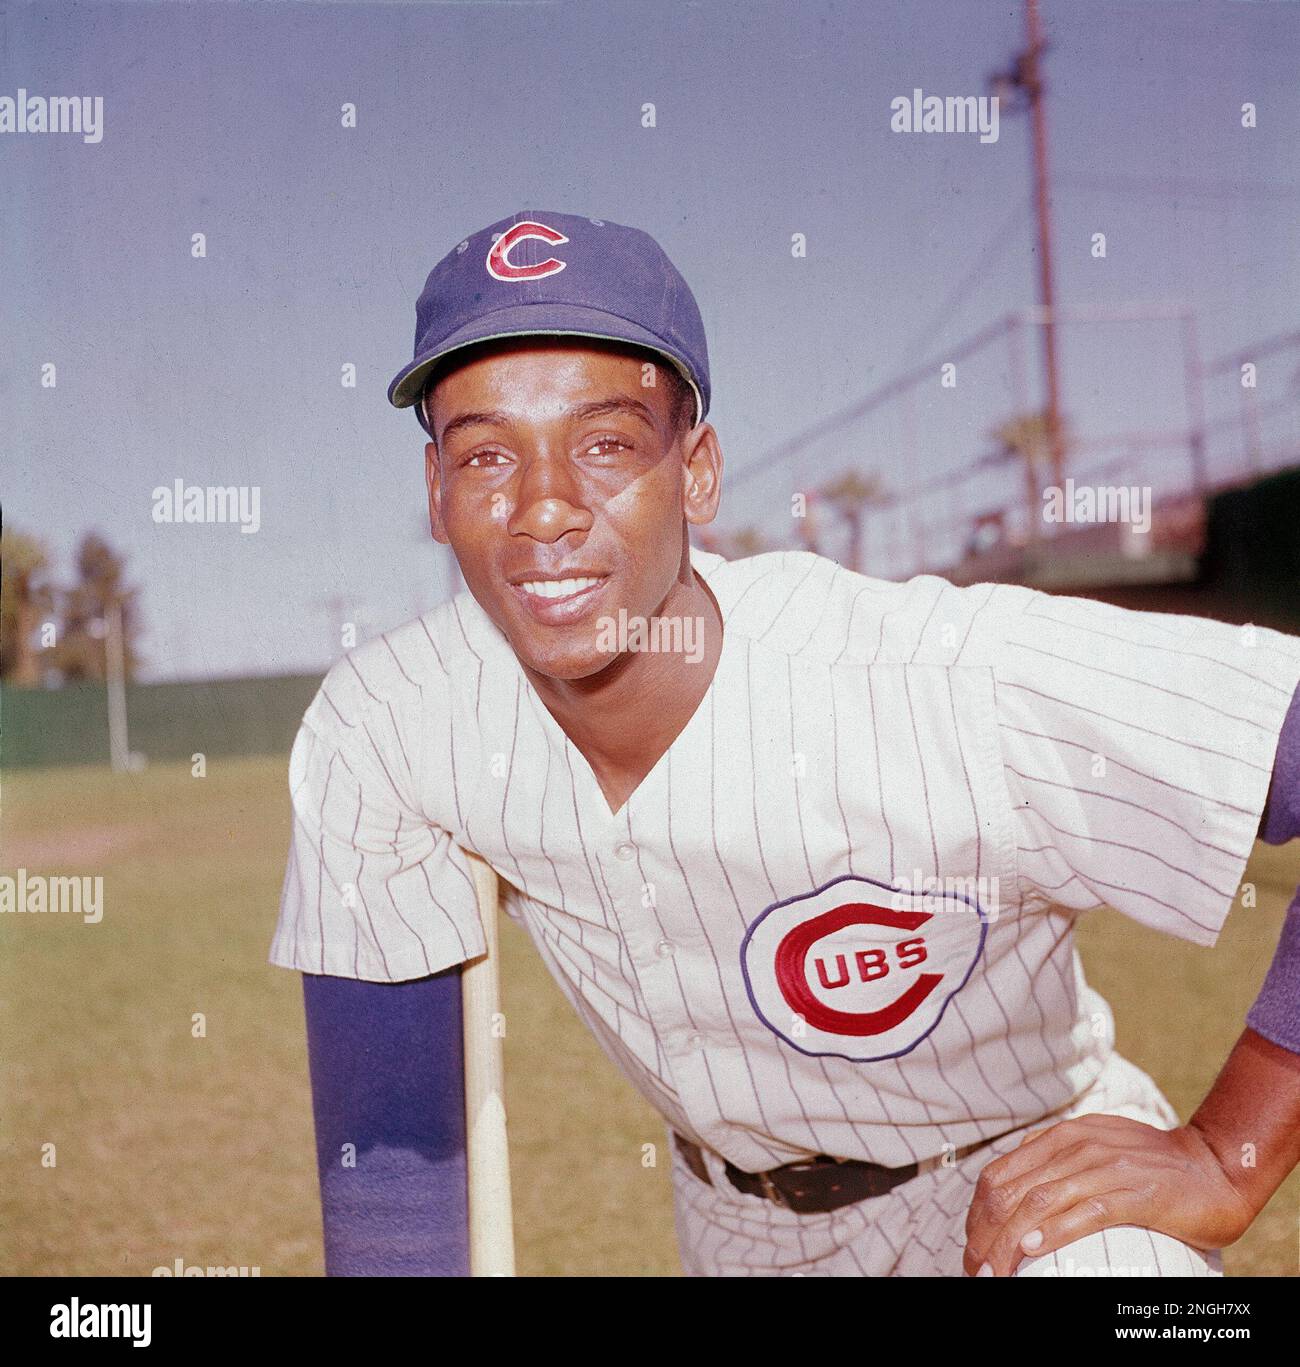 Ernie Banks, infielder for the Chicago Cubs, poses in 1970. (AP